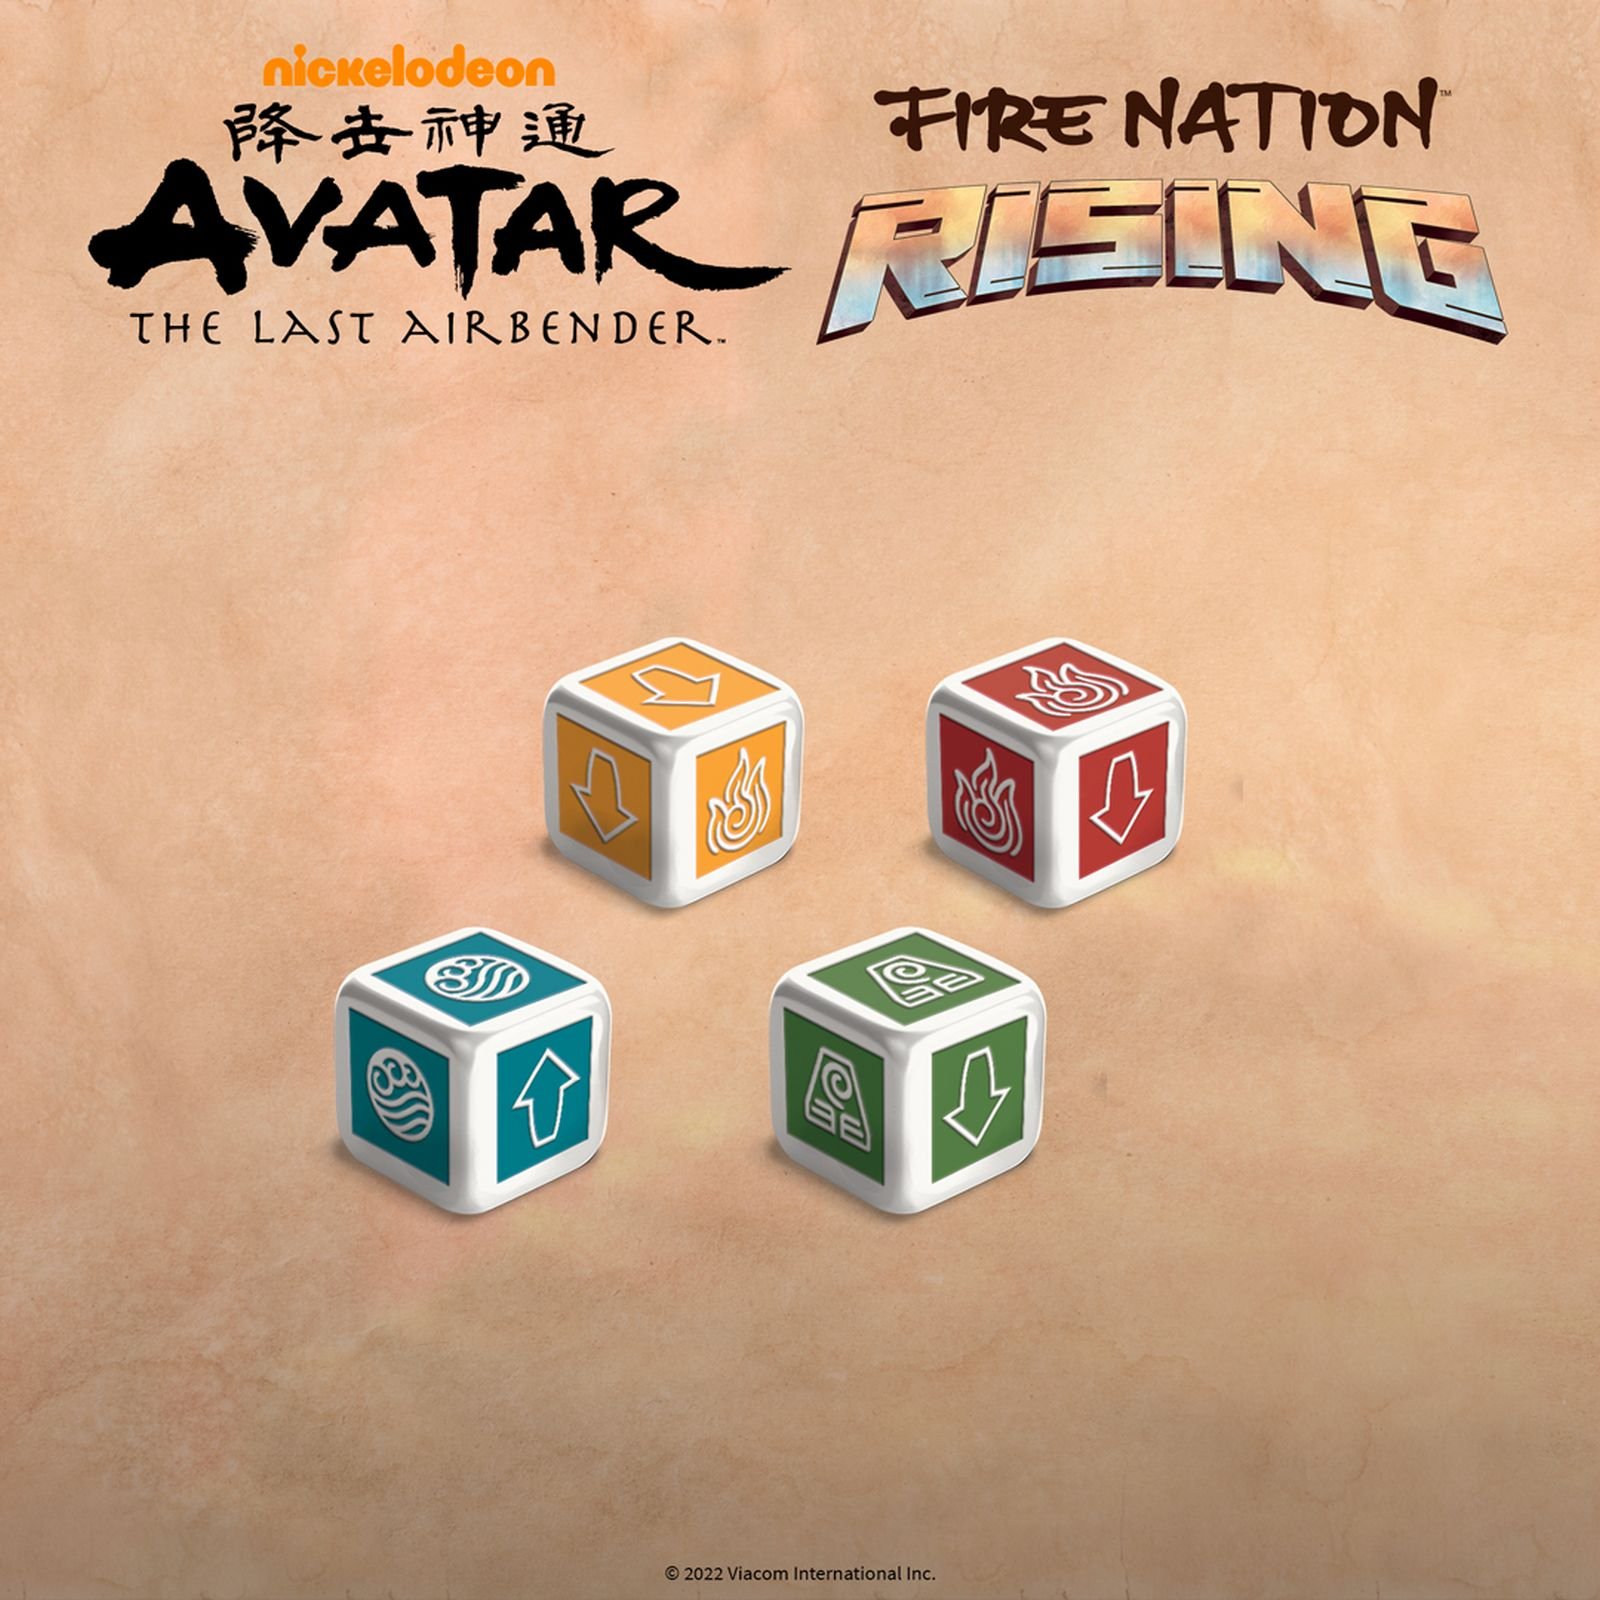 Avatar: The Last Airbender – Fire Nation Rising